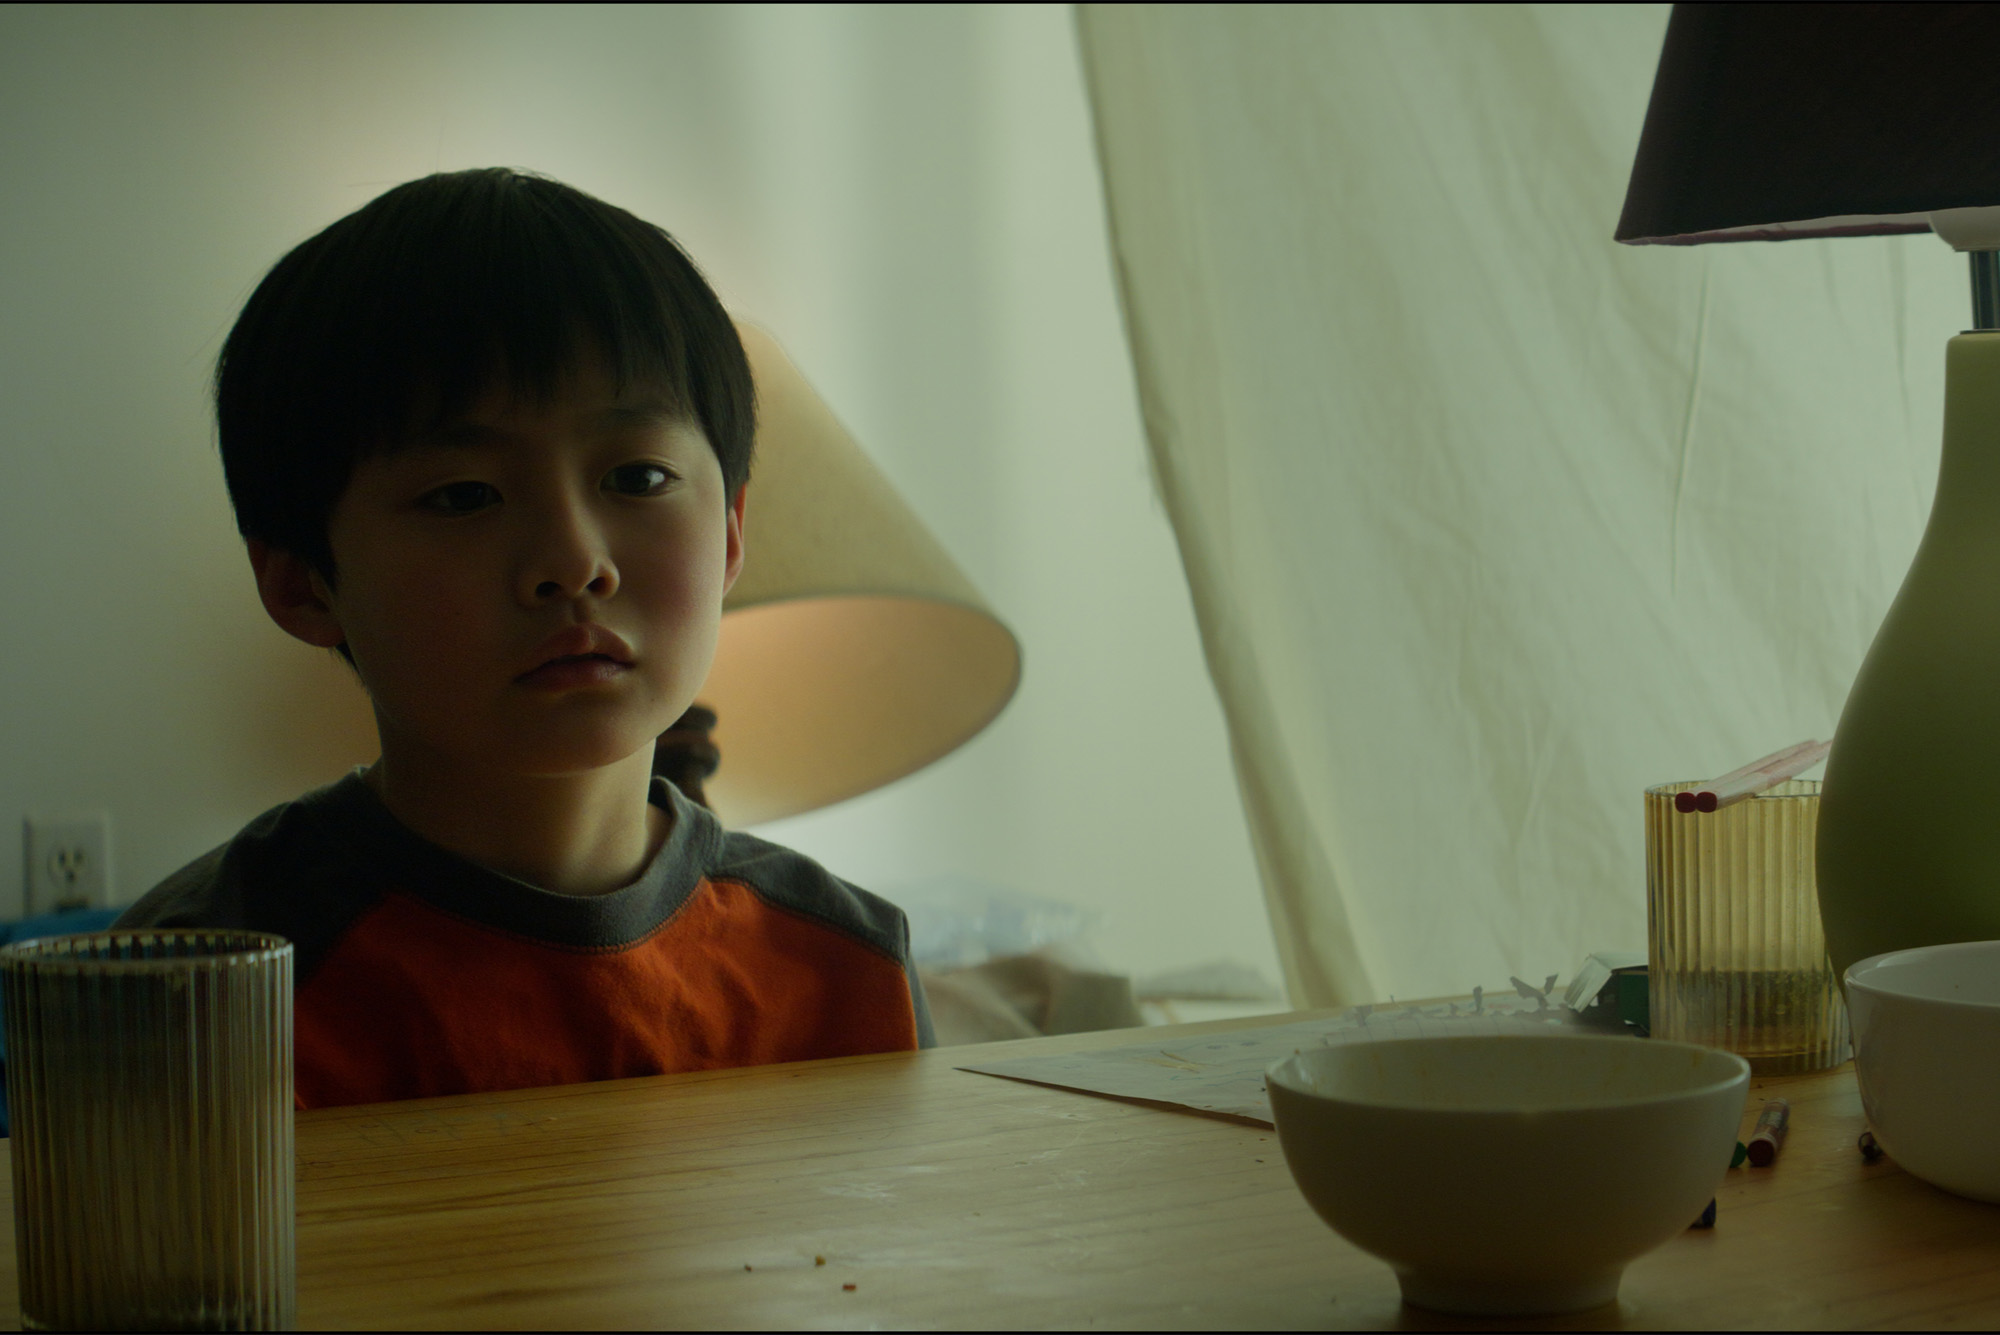 Photo: A young asian child stands in a dimly lit room near a lamp and a table with dishes on it